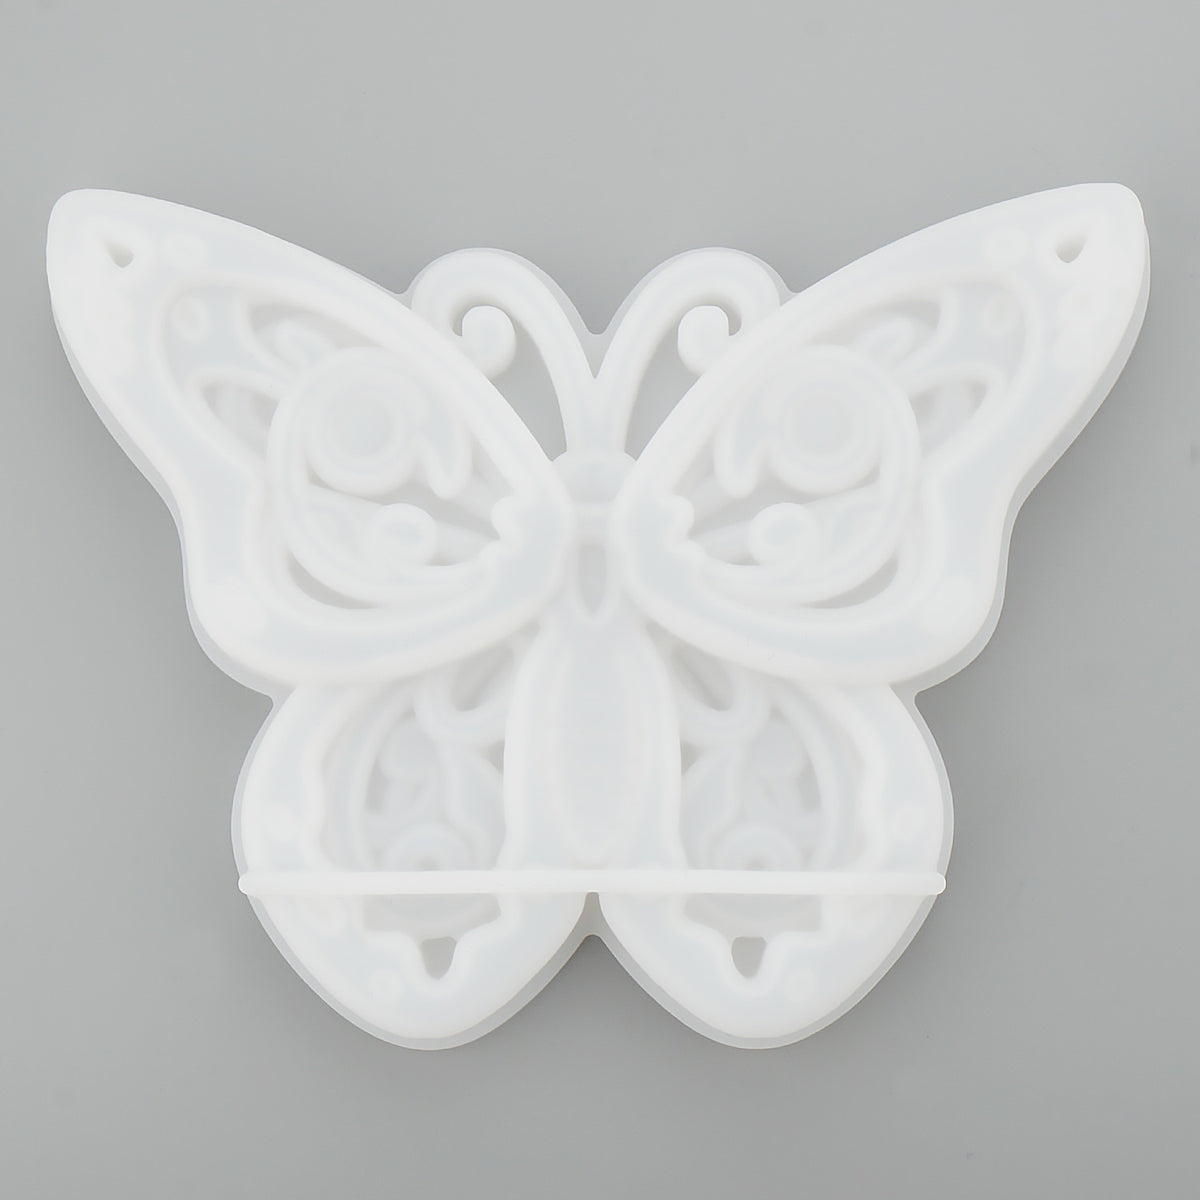 BUTTERFLY RESIN MOLD, Silicone Mold to make shape 1-3/8 wide, cabocho